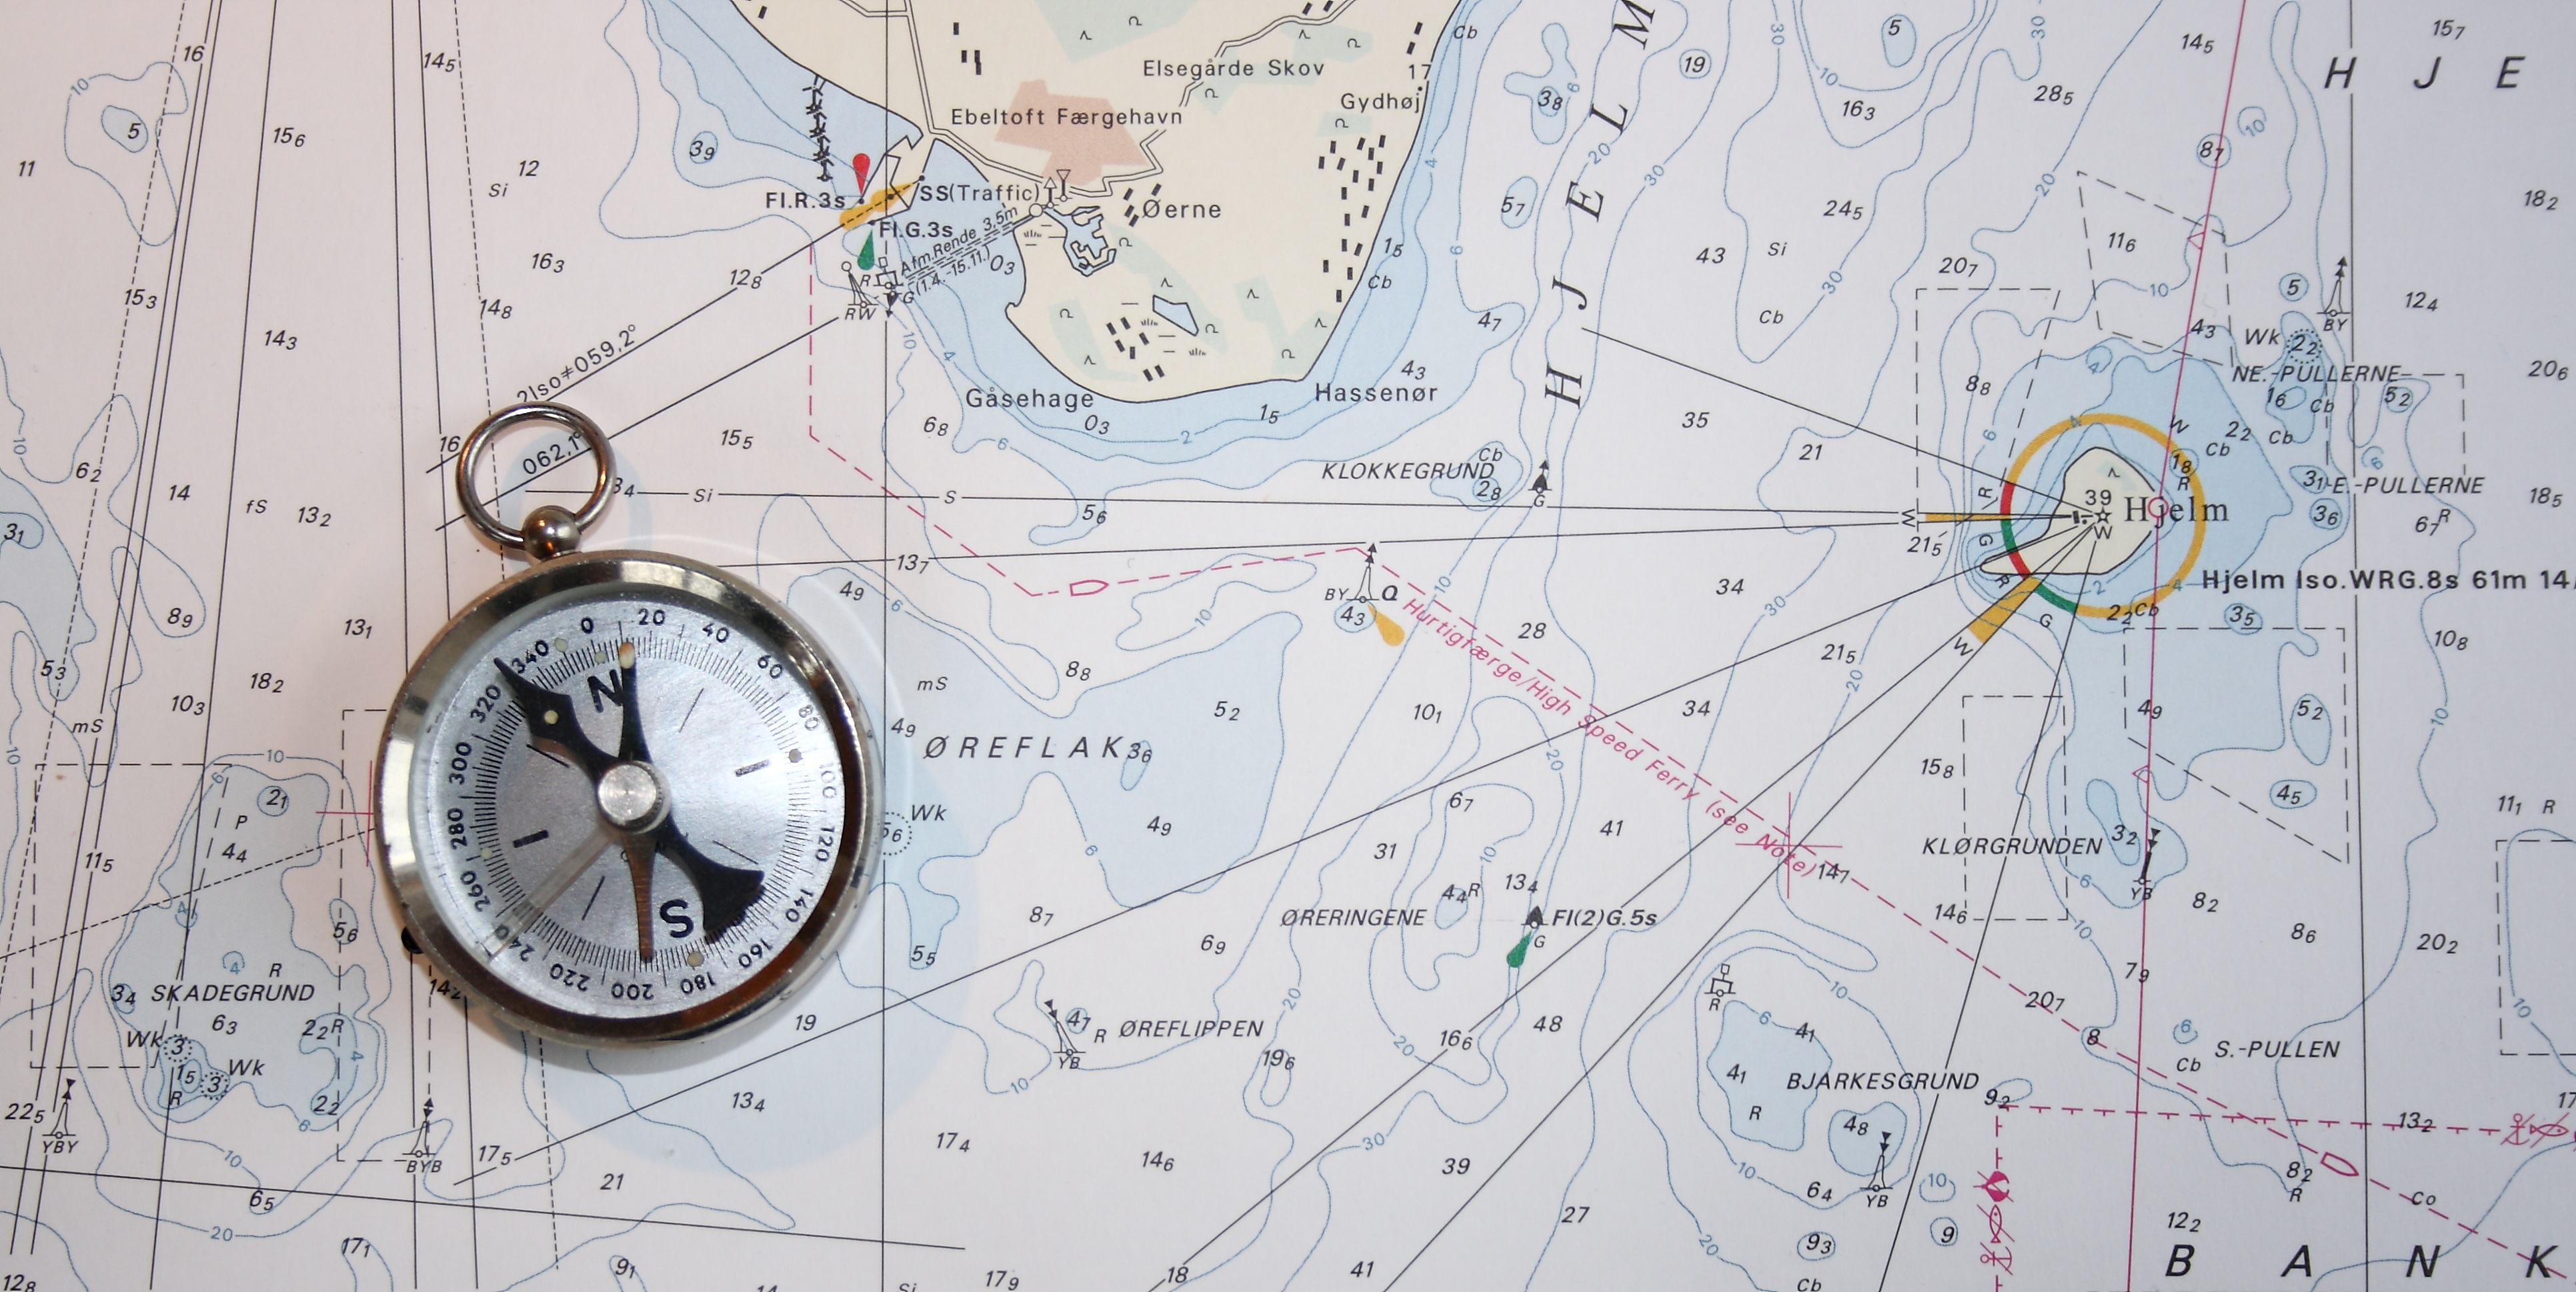 Navigation chart and compass by SteenJepsen